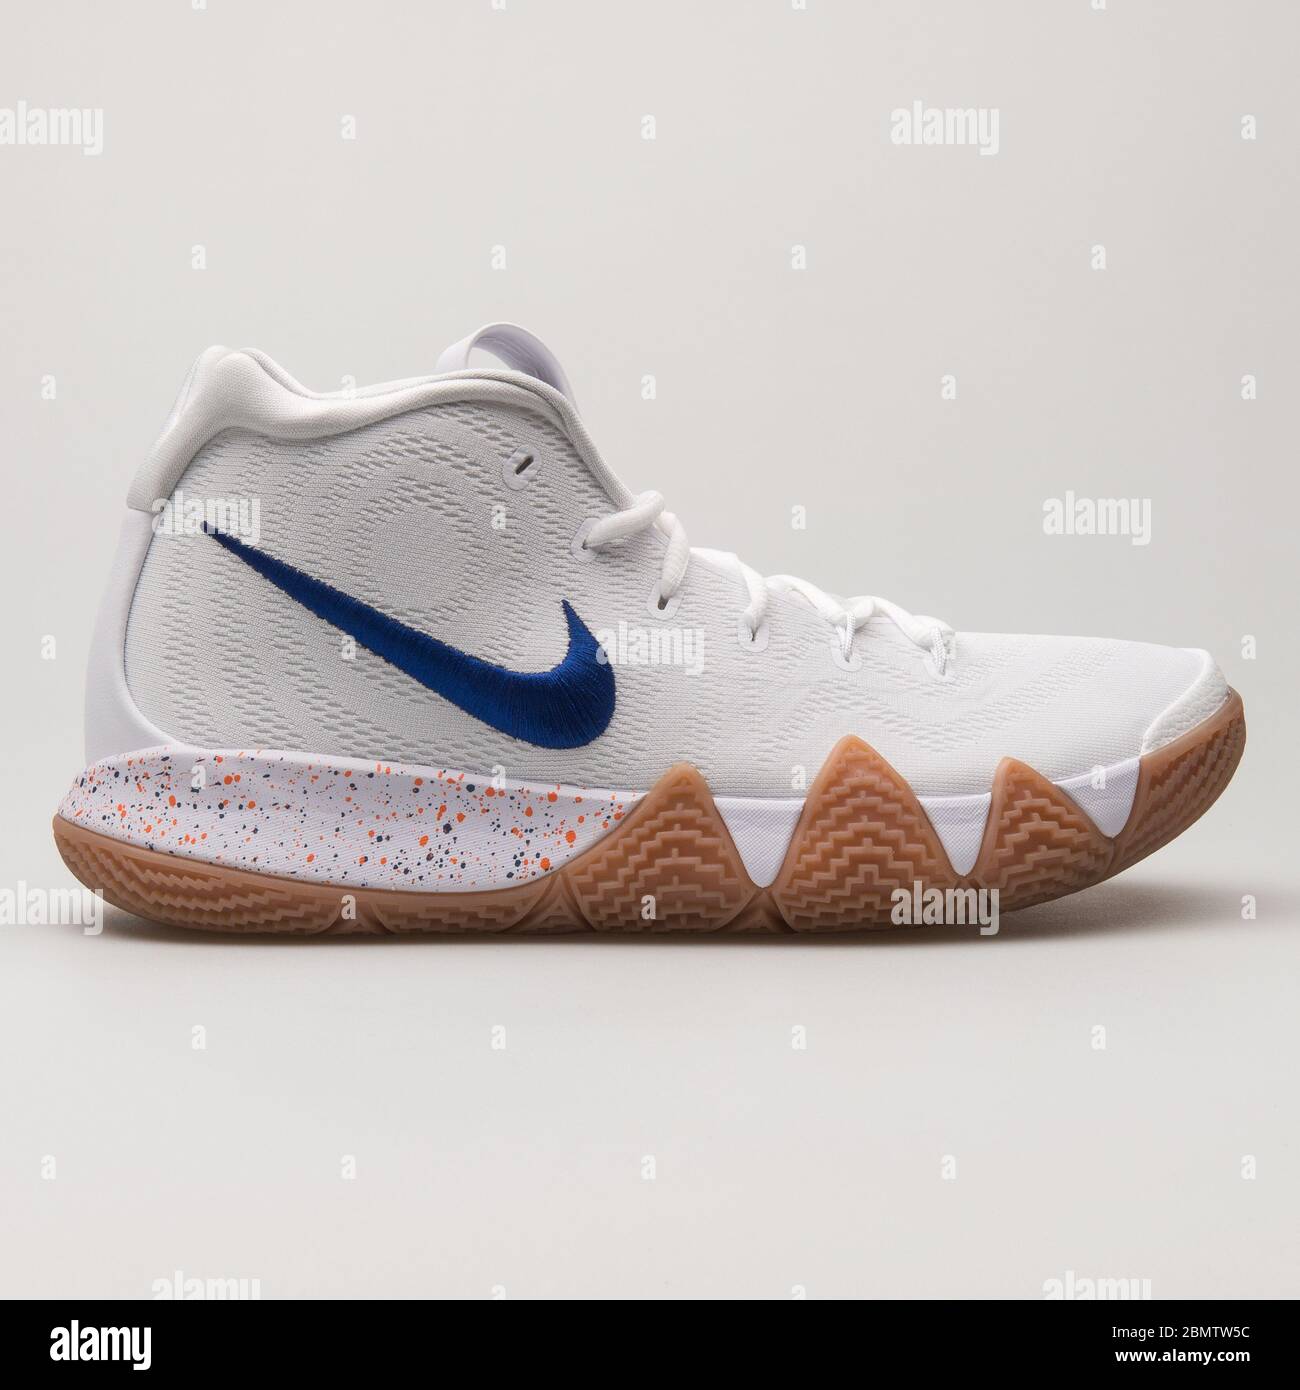 VIENNA, AUSTRIA - JUNE 14, 2018: Nike Kyrie 4 white, blue and brown sneaker on white background. Stock Photo